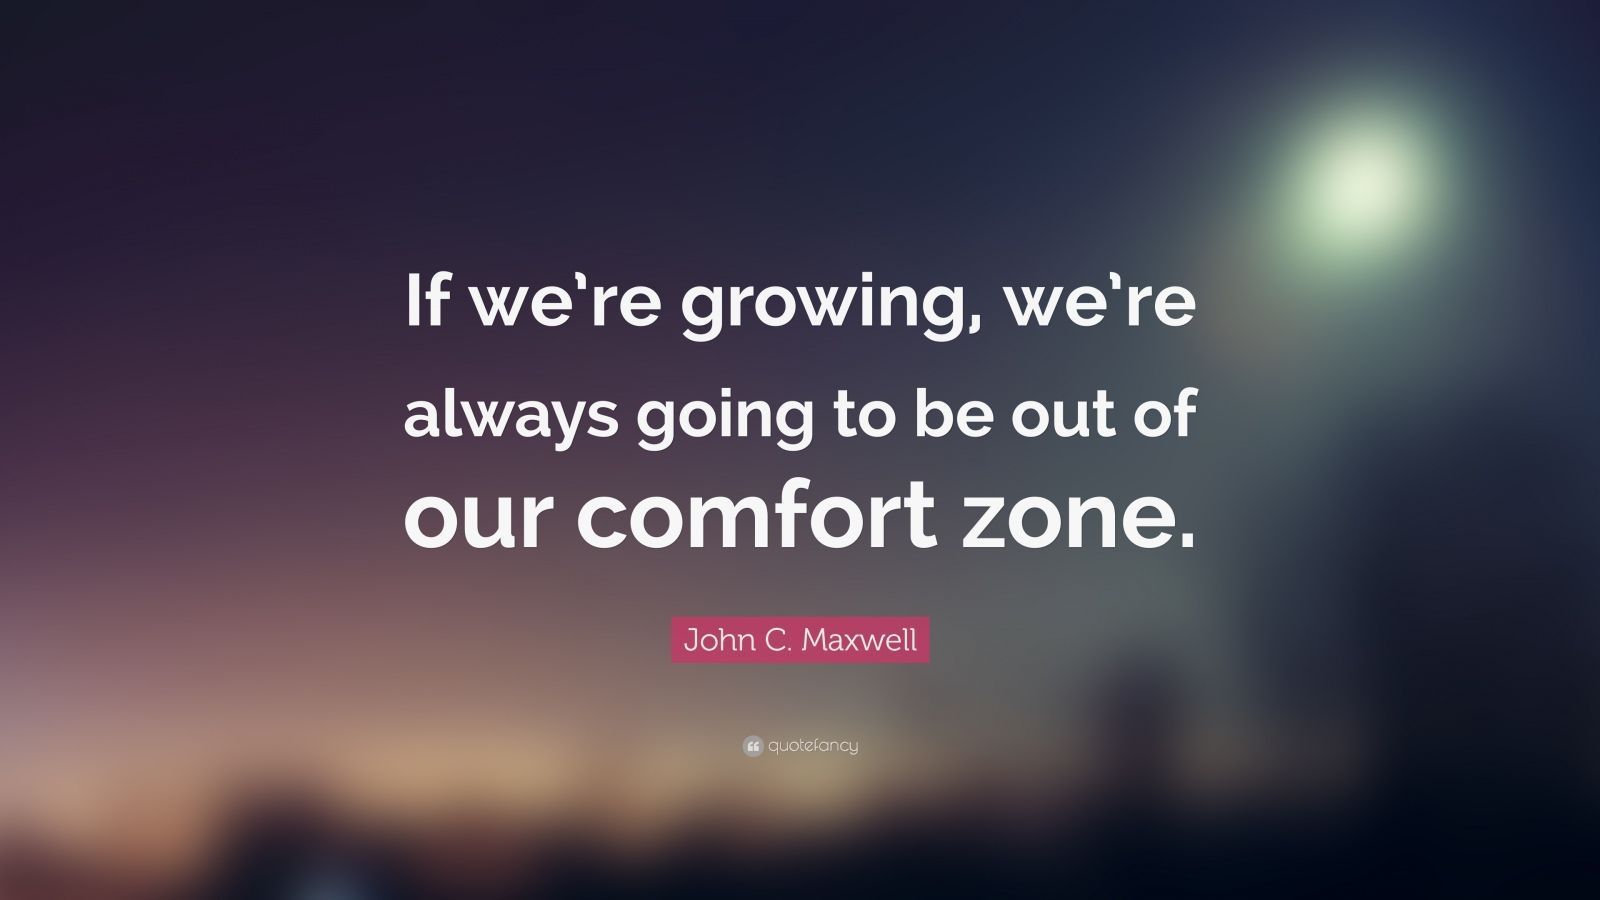 Positive #Quotes: “If we're growing, we're always going to be out of our comfort zone.”